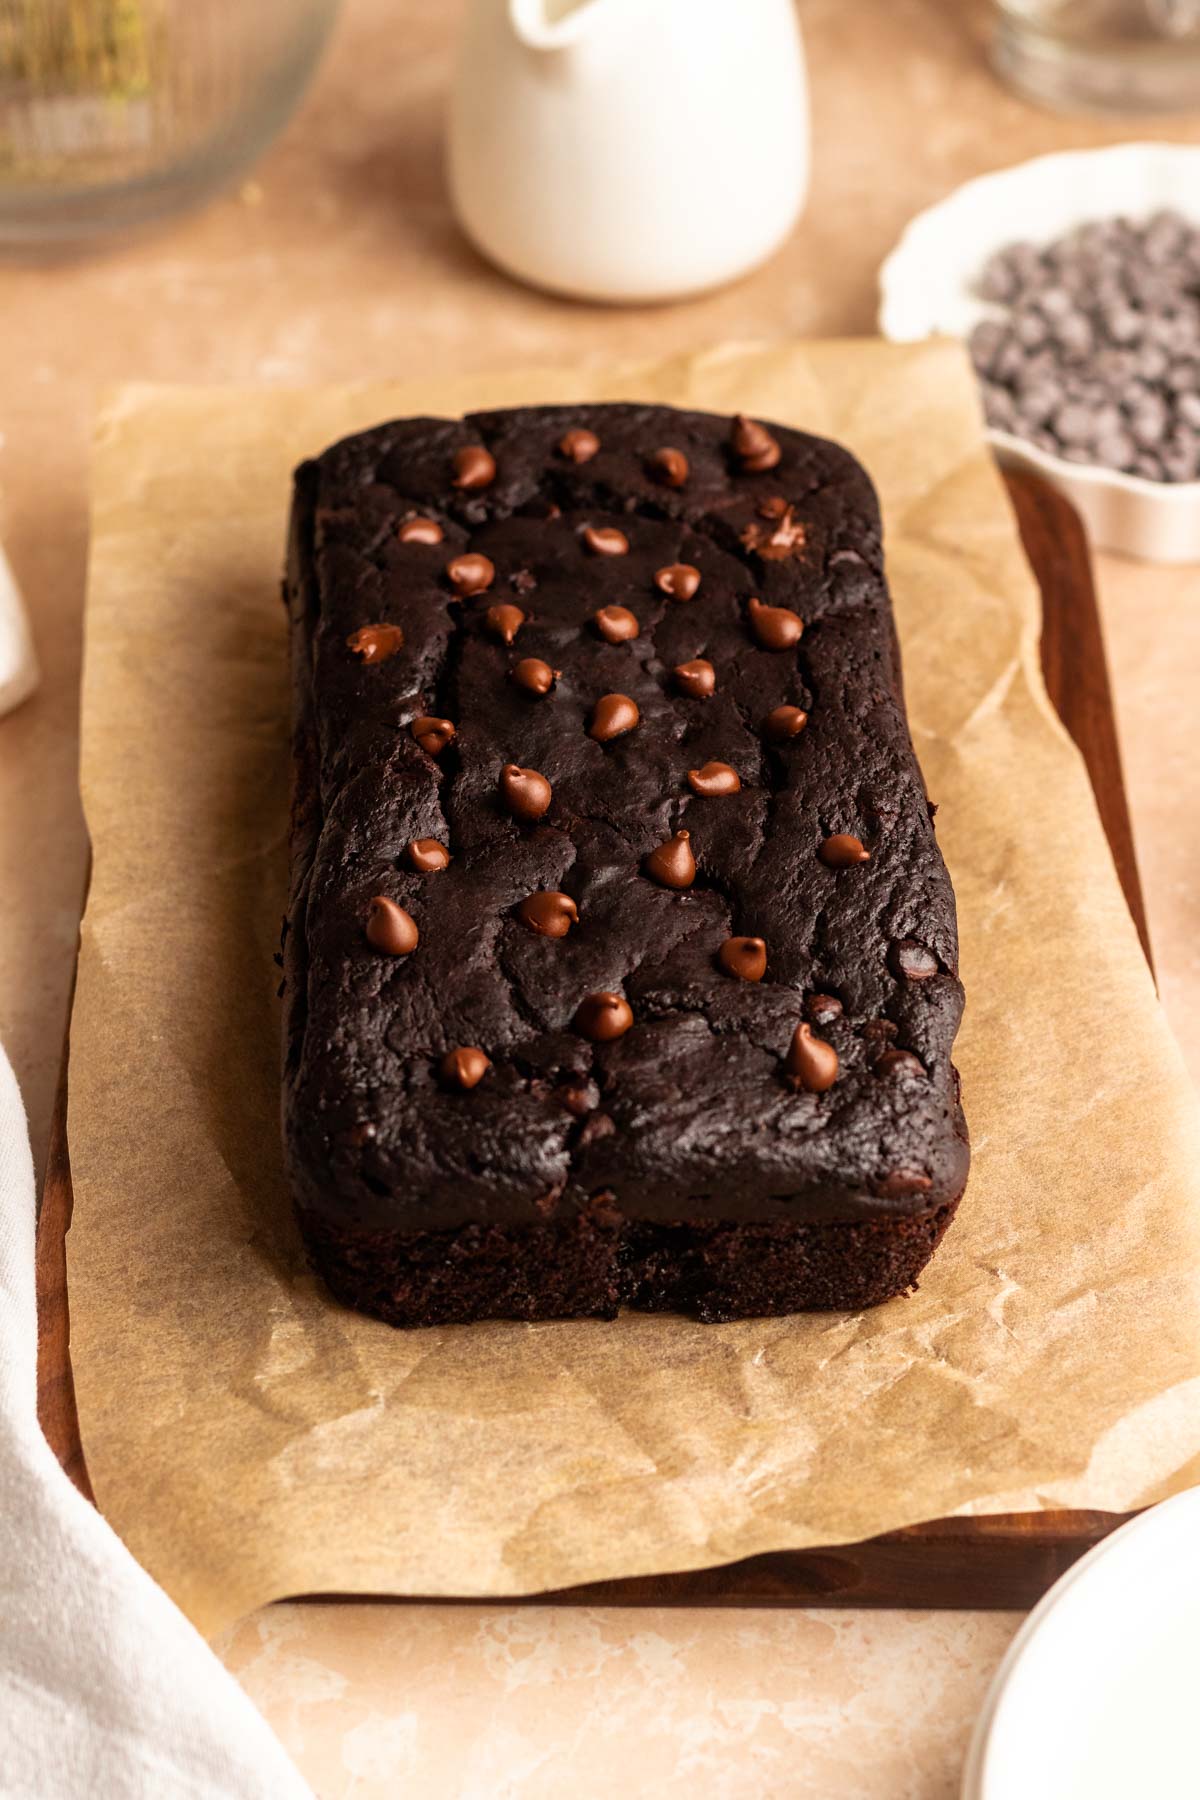 Loaf of chocolate pumpkin bread on a parchment paper.